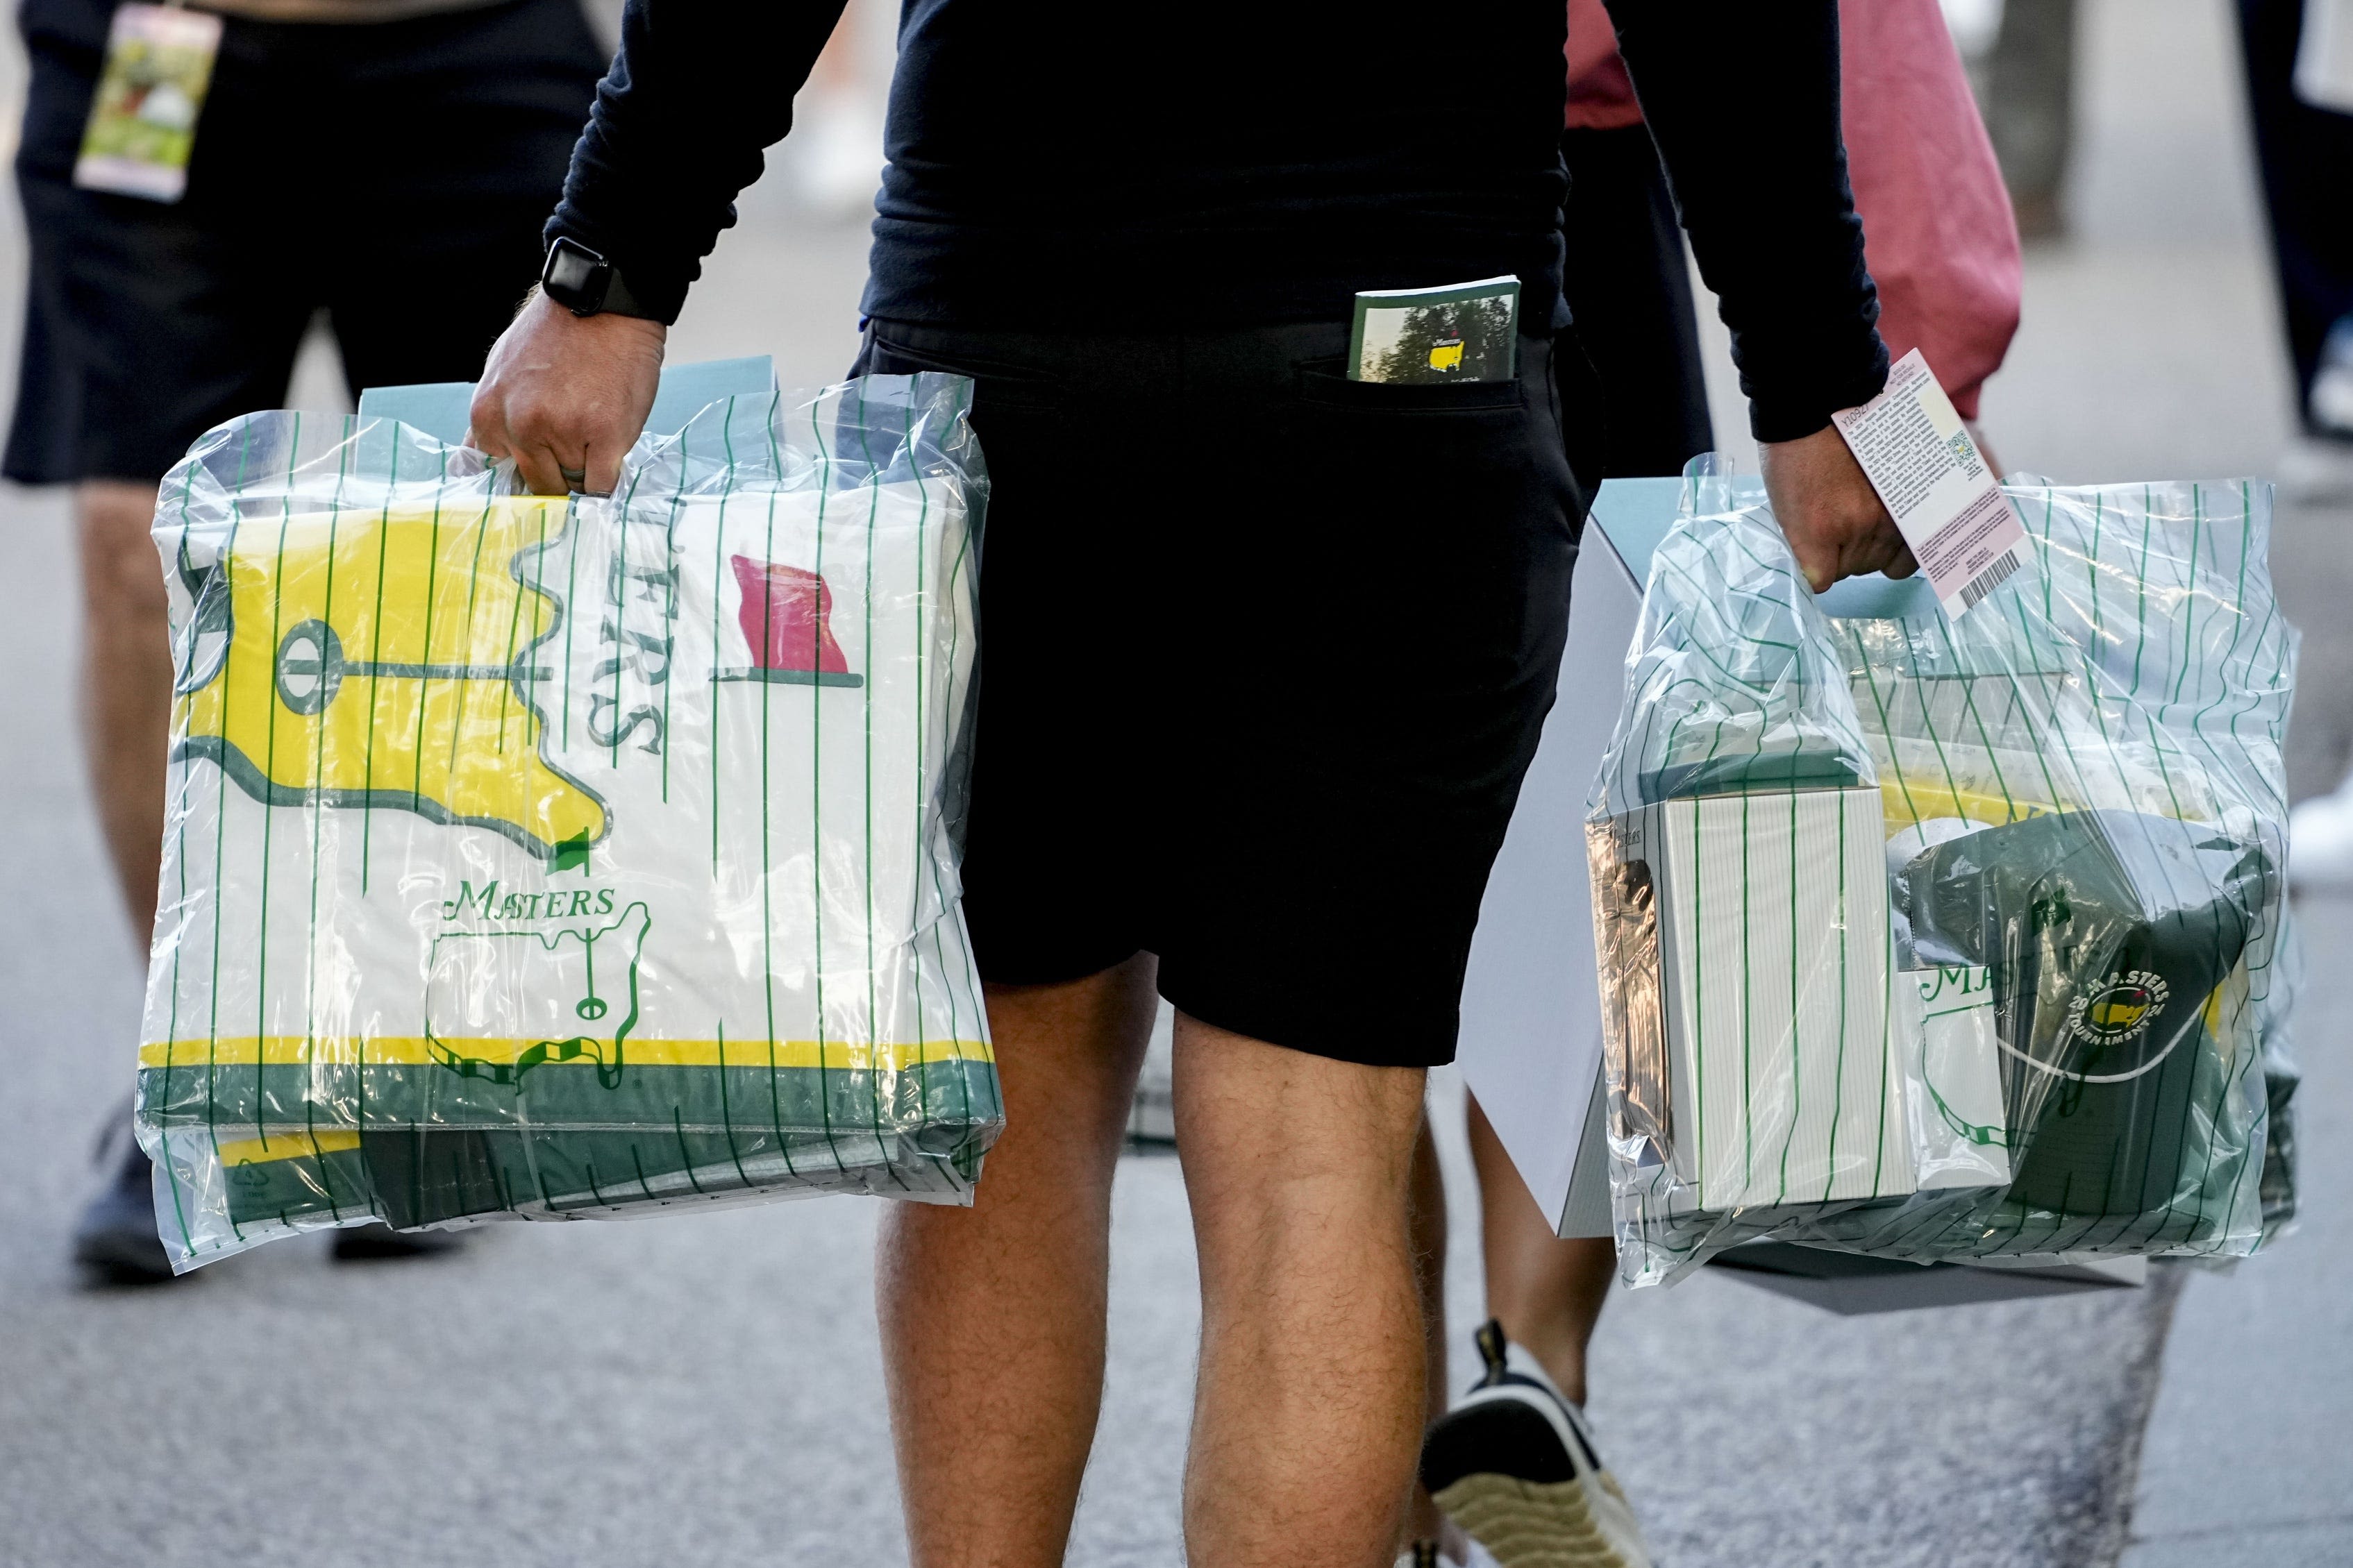 Plea agreement offers details on $5.6 million in thefts of Masters merchandise